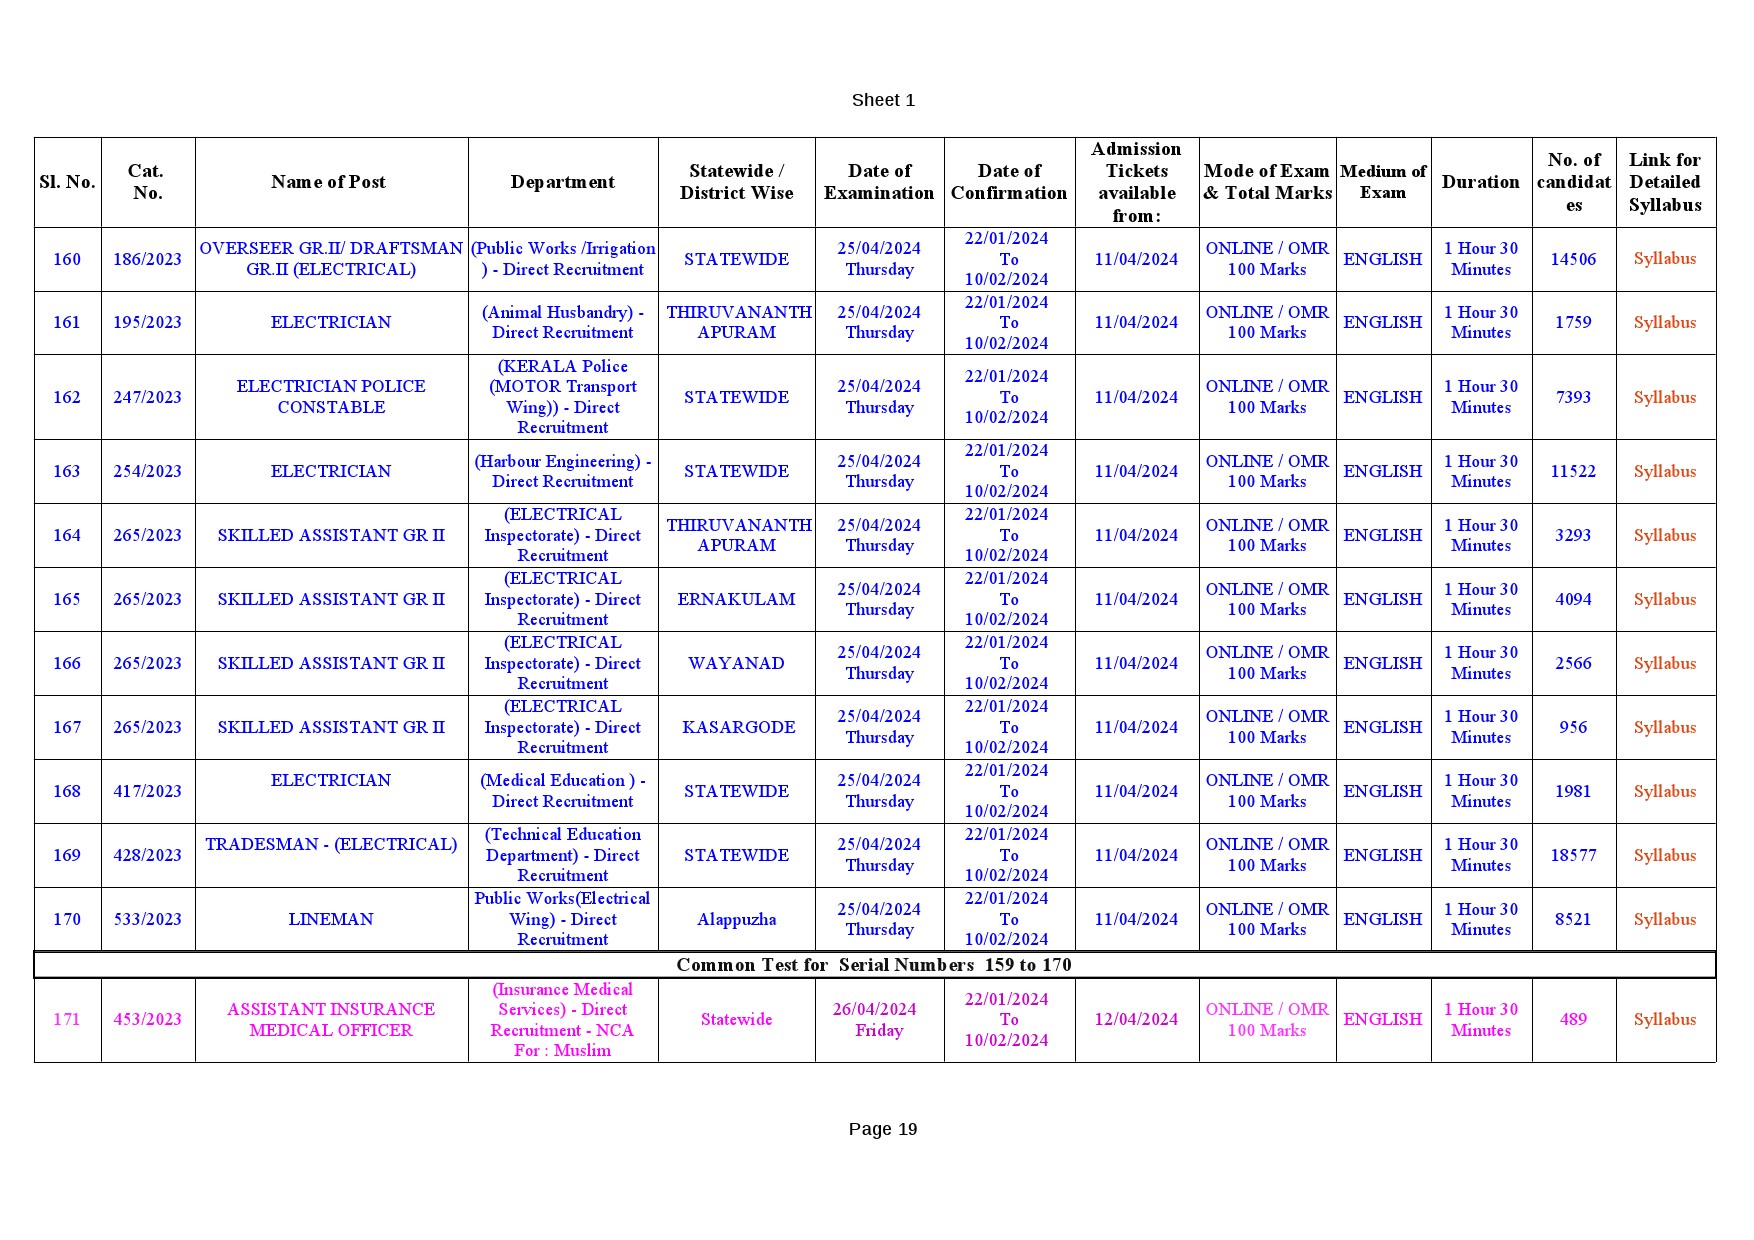 Examination Programme For The Month Of April 2024 - Notification Image 19